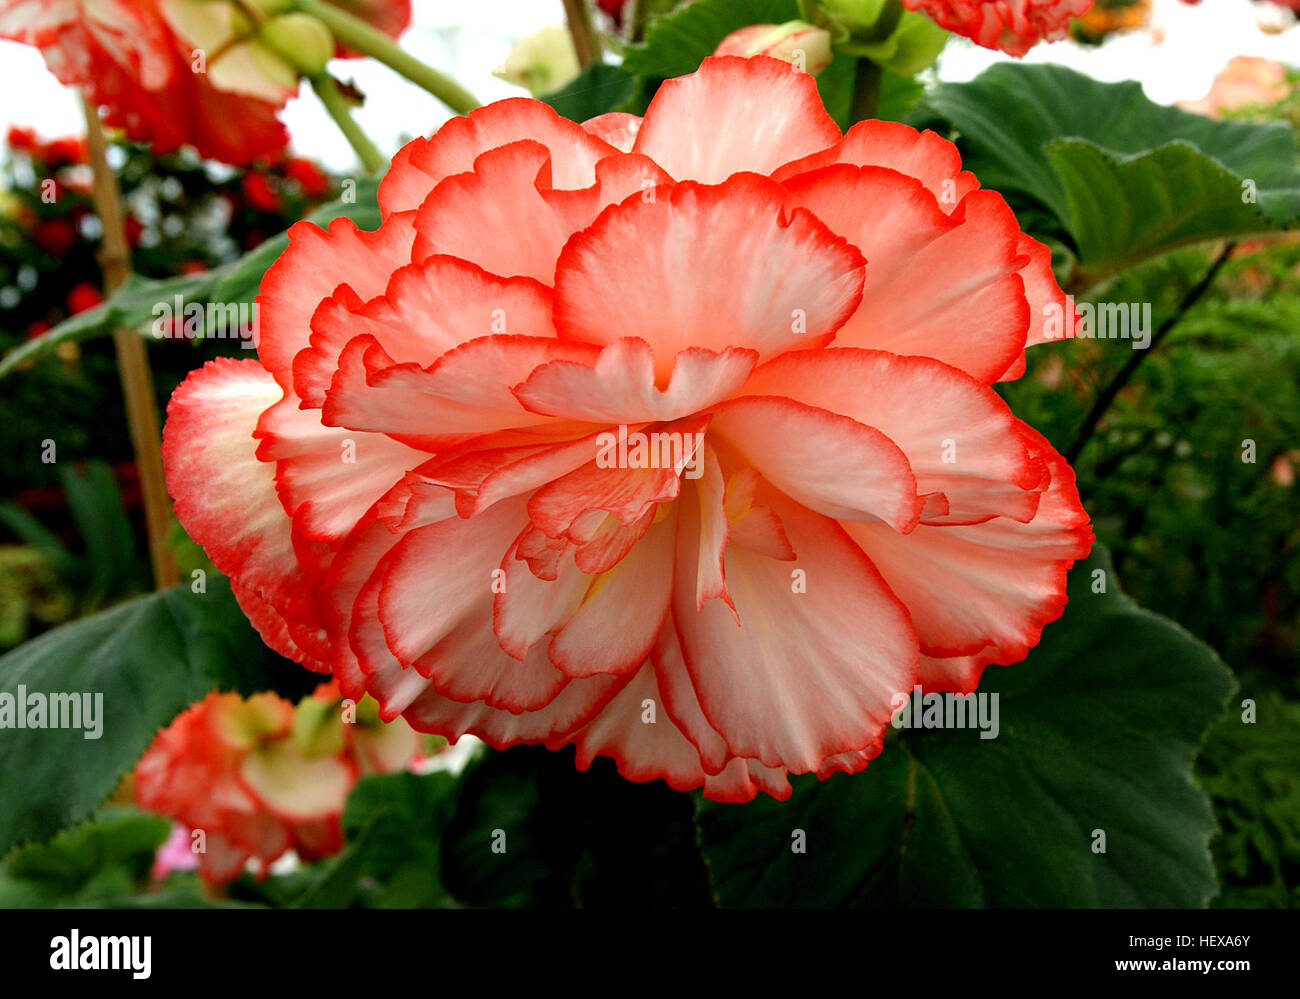 Begonia is a genus of perennial flowering plants in the family Begoniaceae. The genus contains about 1,400 different plant species. The Begonias are native to moist subtropical and tropical climates Stock Photo